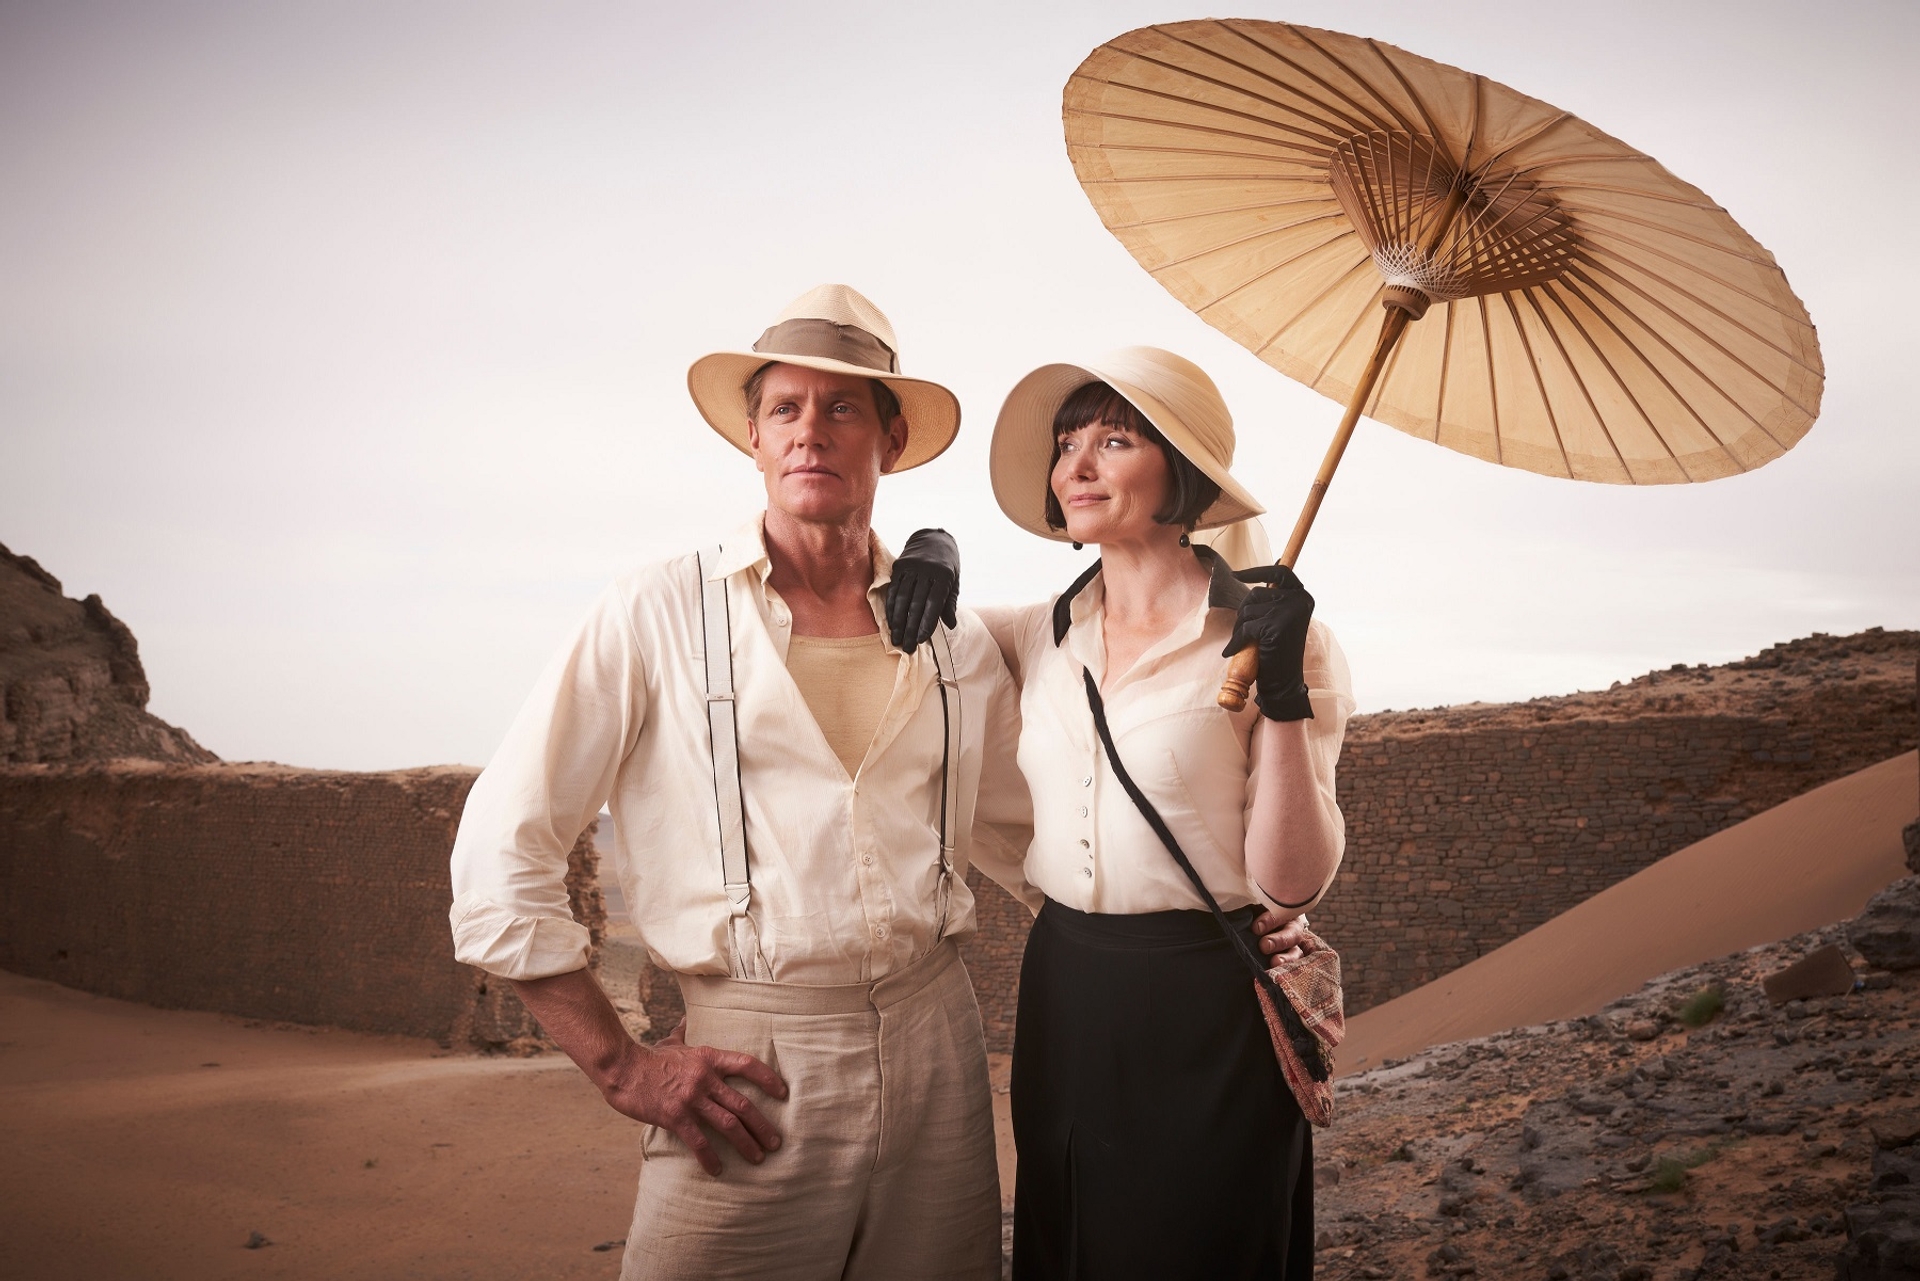 MFCT_S01_Essie Davies as Phryne and Nathan Page as Jack ©Every Cloud Productions & all3media international